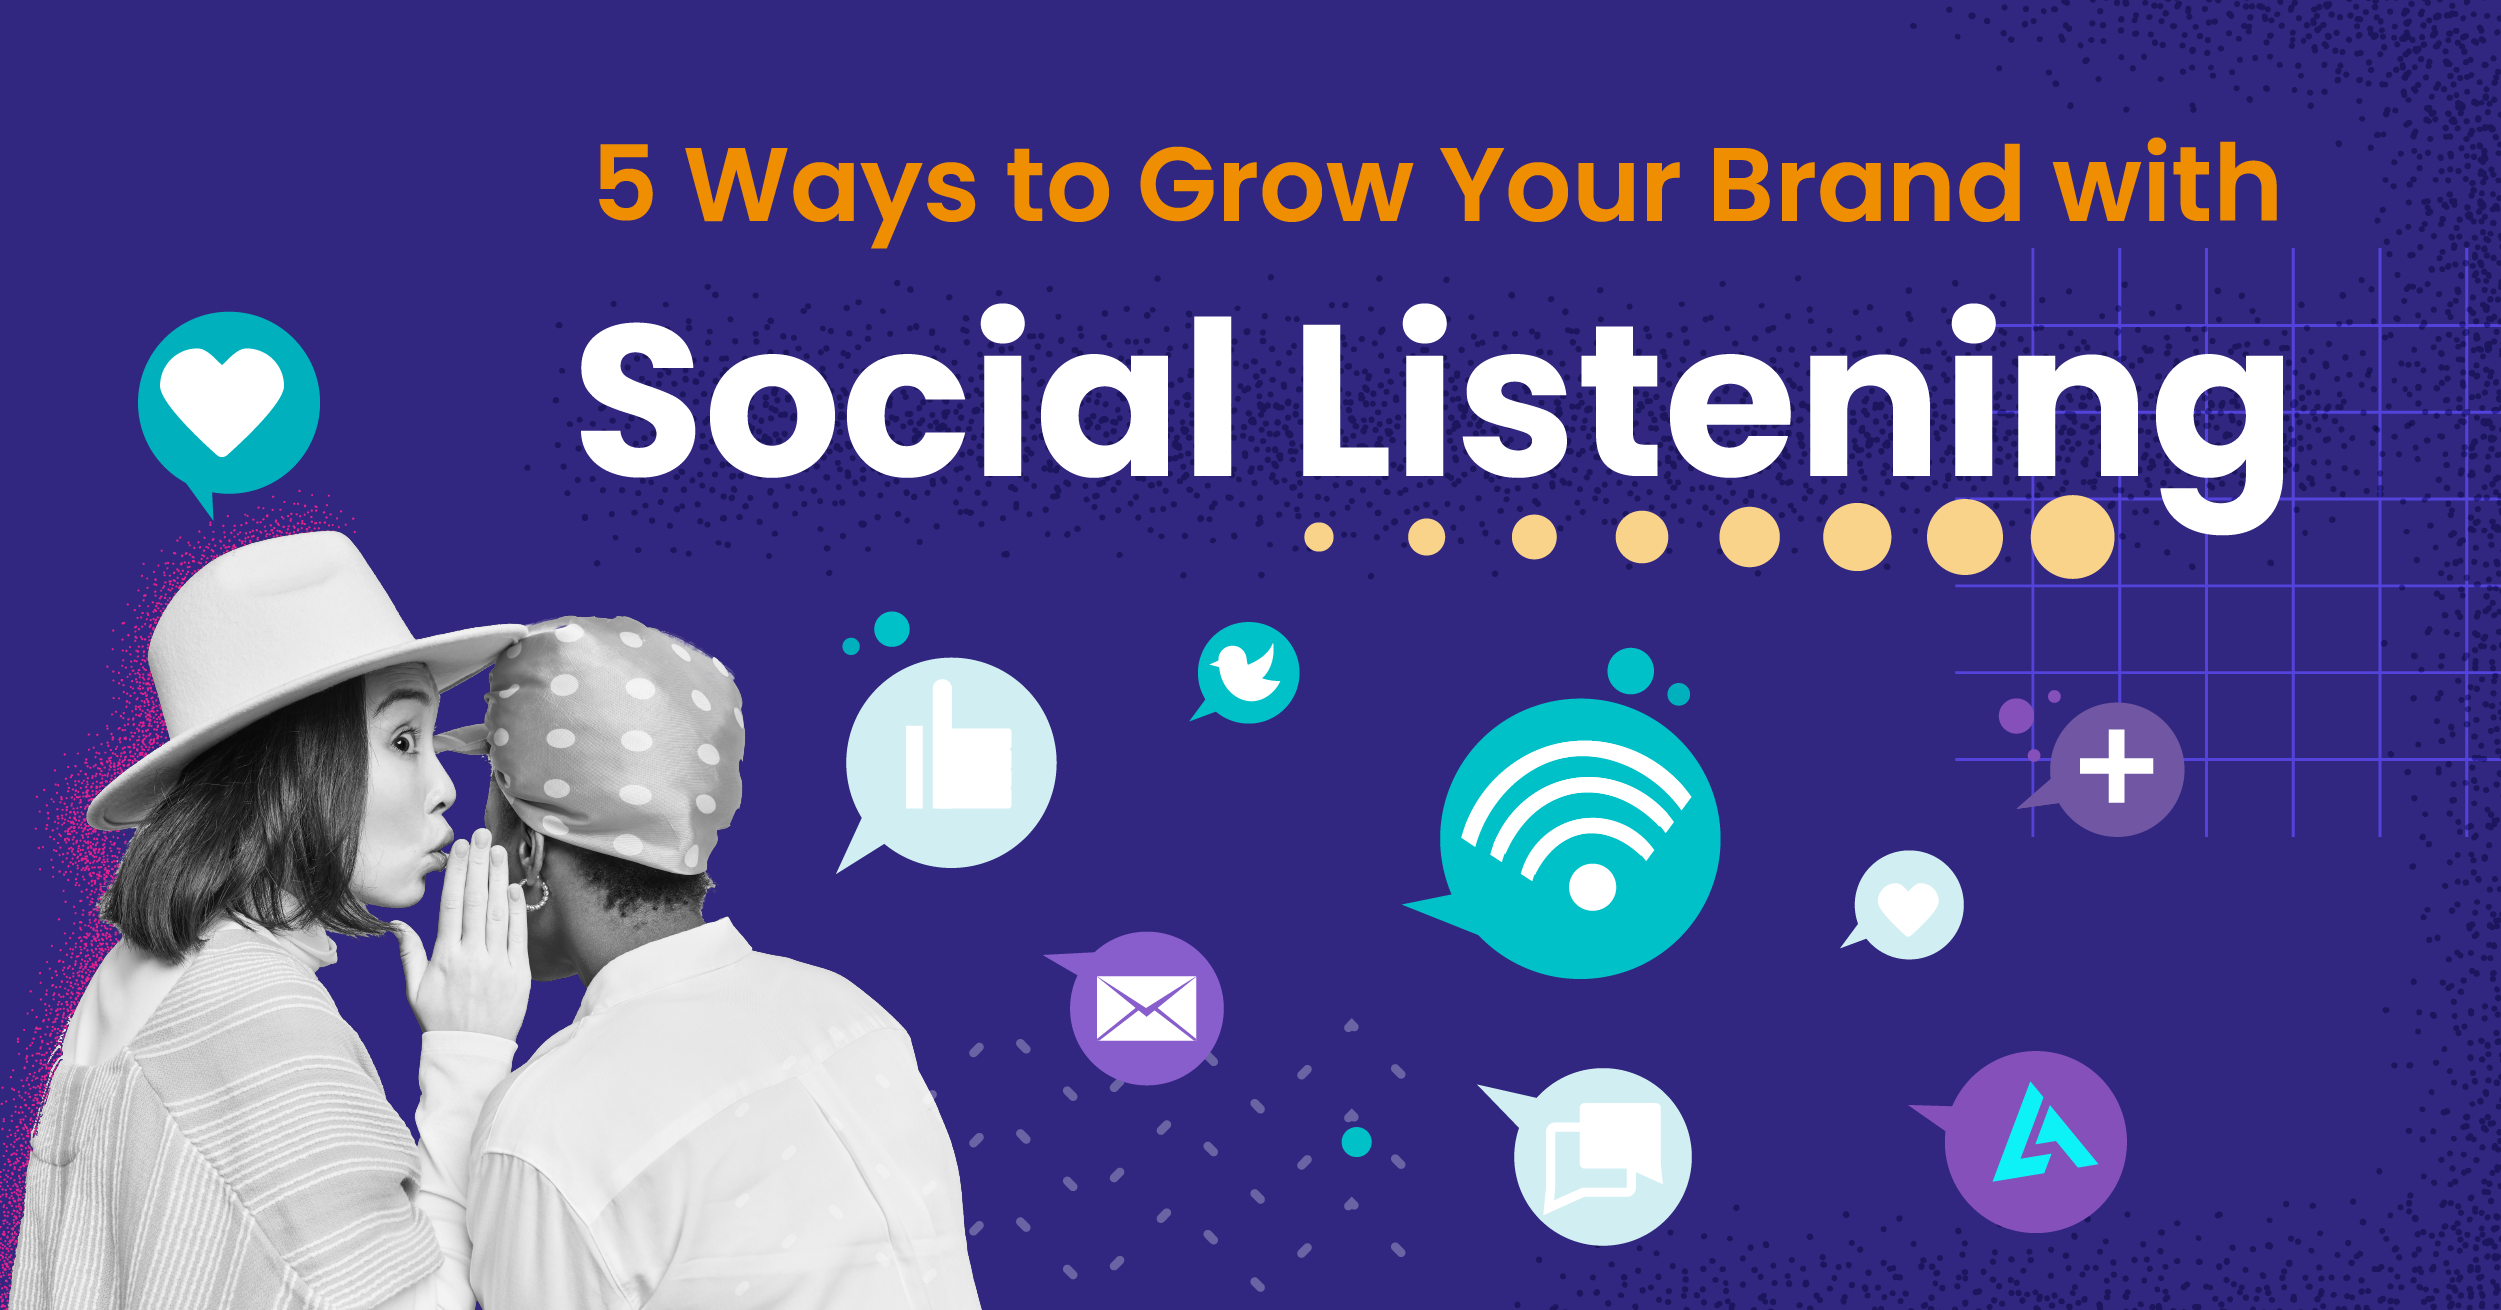 5 Ways to Grow Your Brand with Social Listening